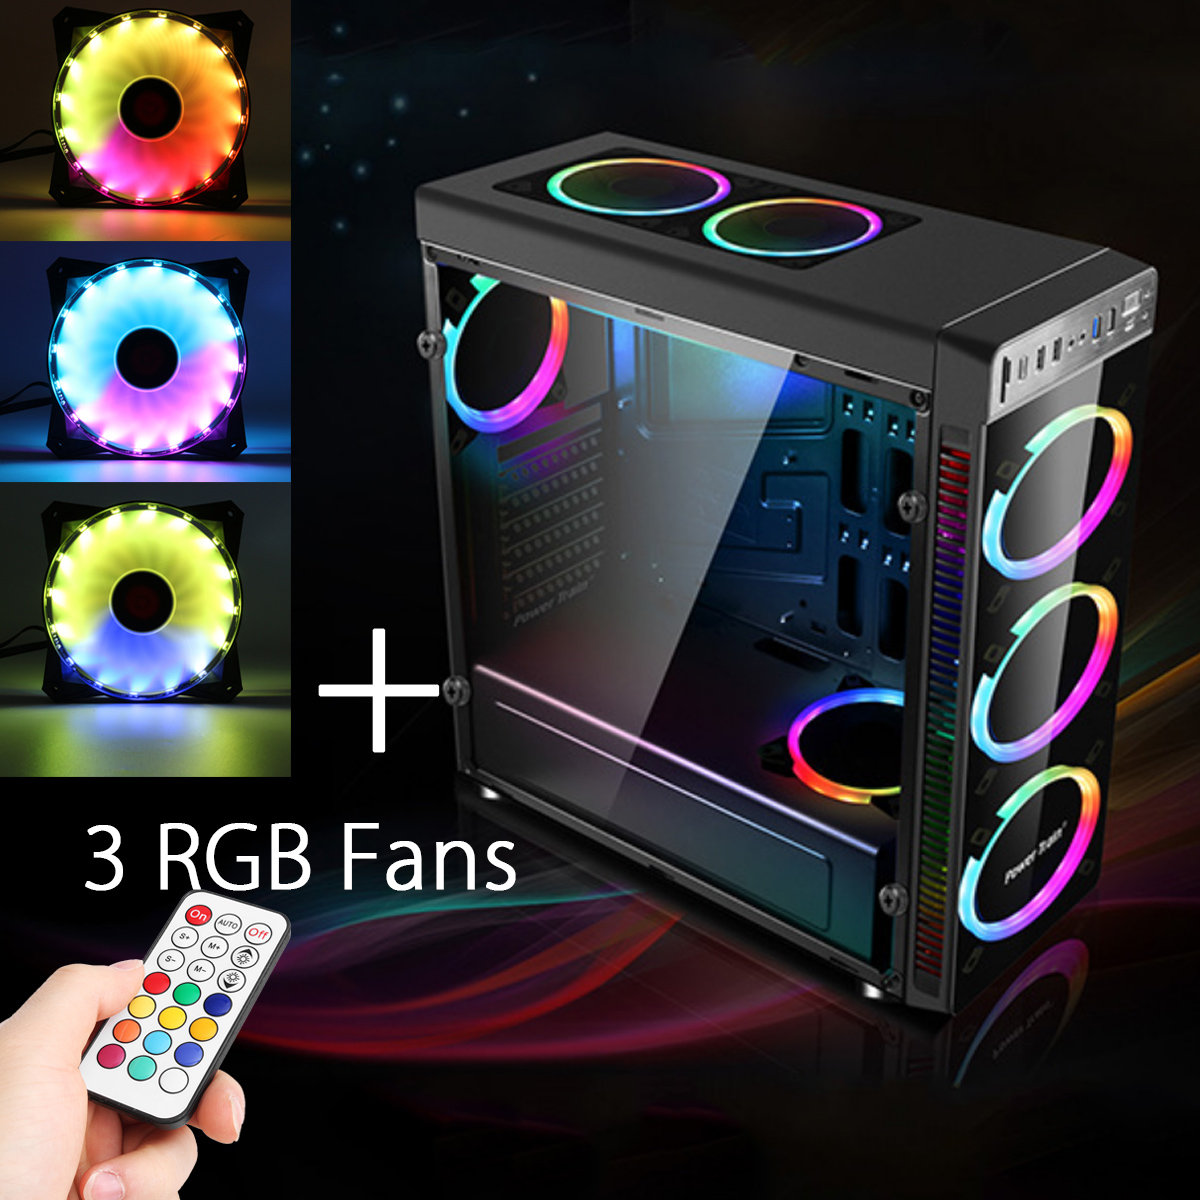 PC-Computer-ATX-PC-Case-Midi-Tower-With-3-RGB-120mm-Cooling-Fans-Remote-control-1254912